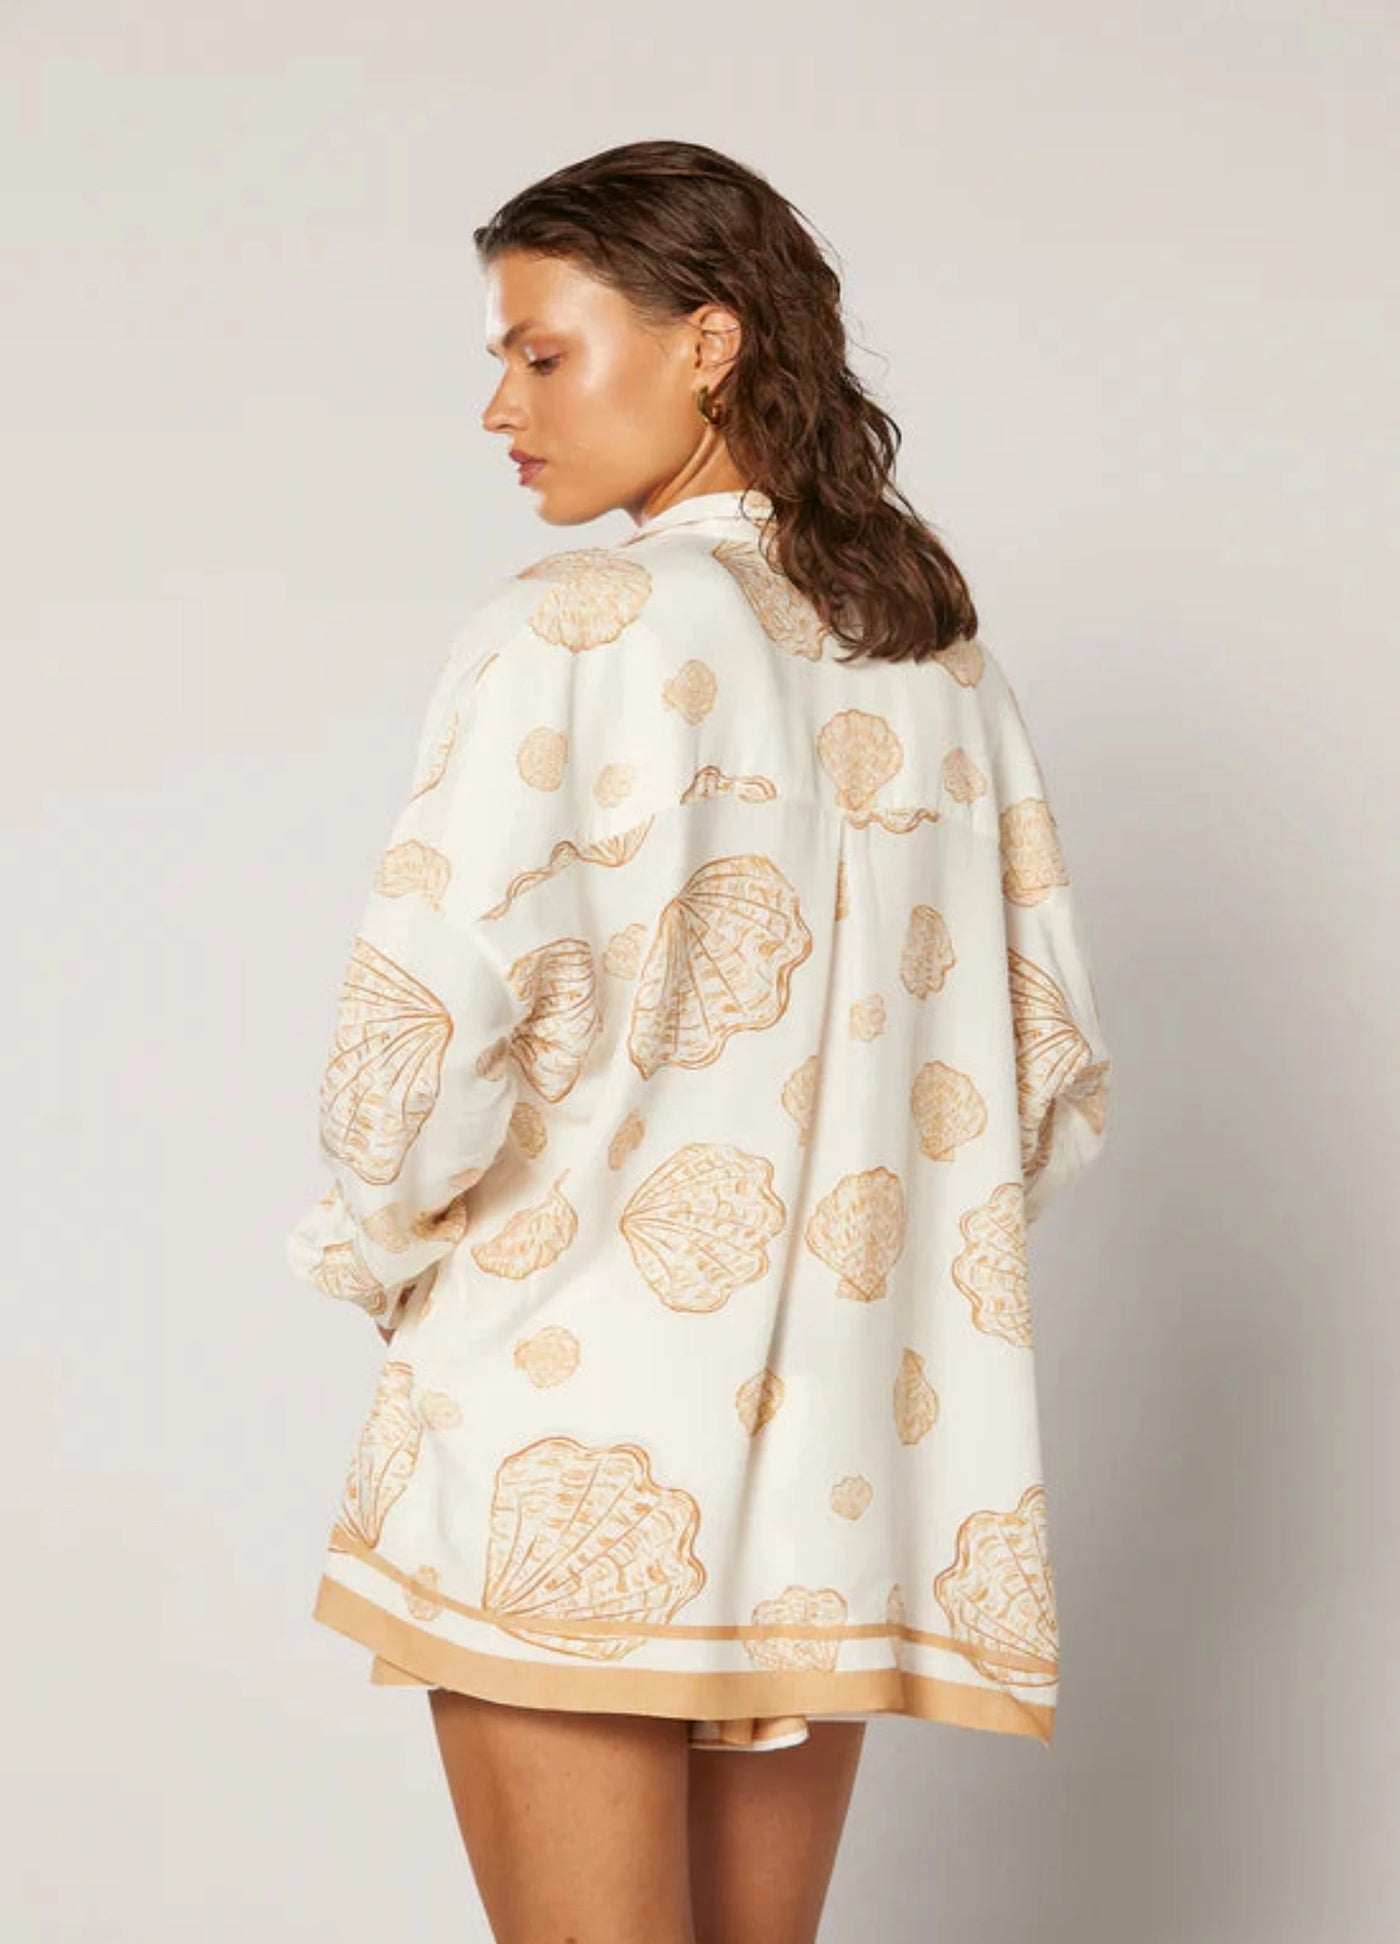 Shell print rayon shirt with long sleeve that can be rolled up